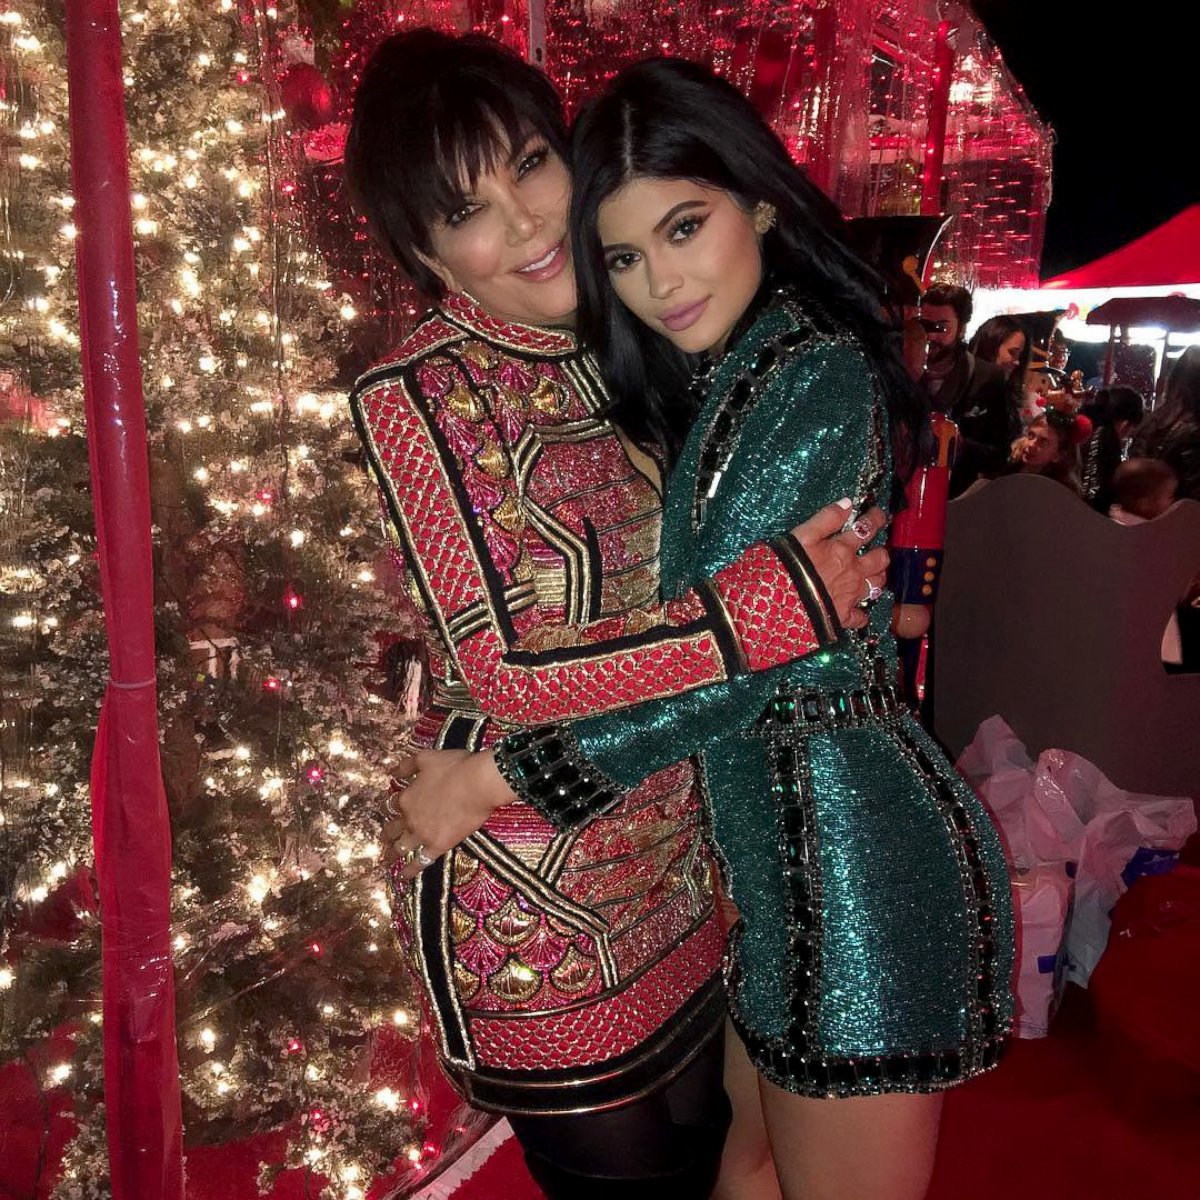 PHOTO: Kylie Jenner shared this image with her mom to her Instagram account, Dec. 24, 2015.